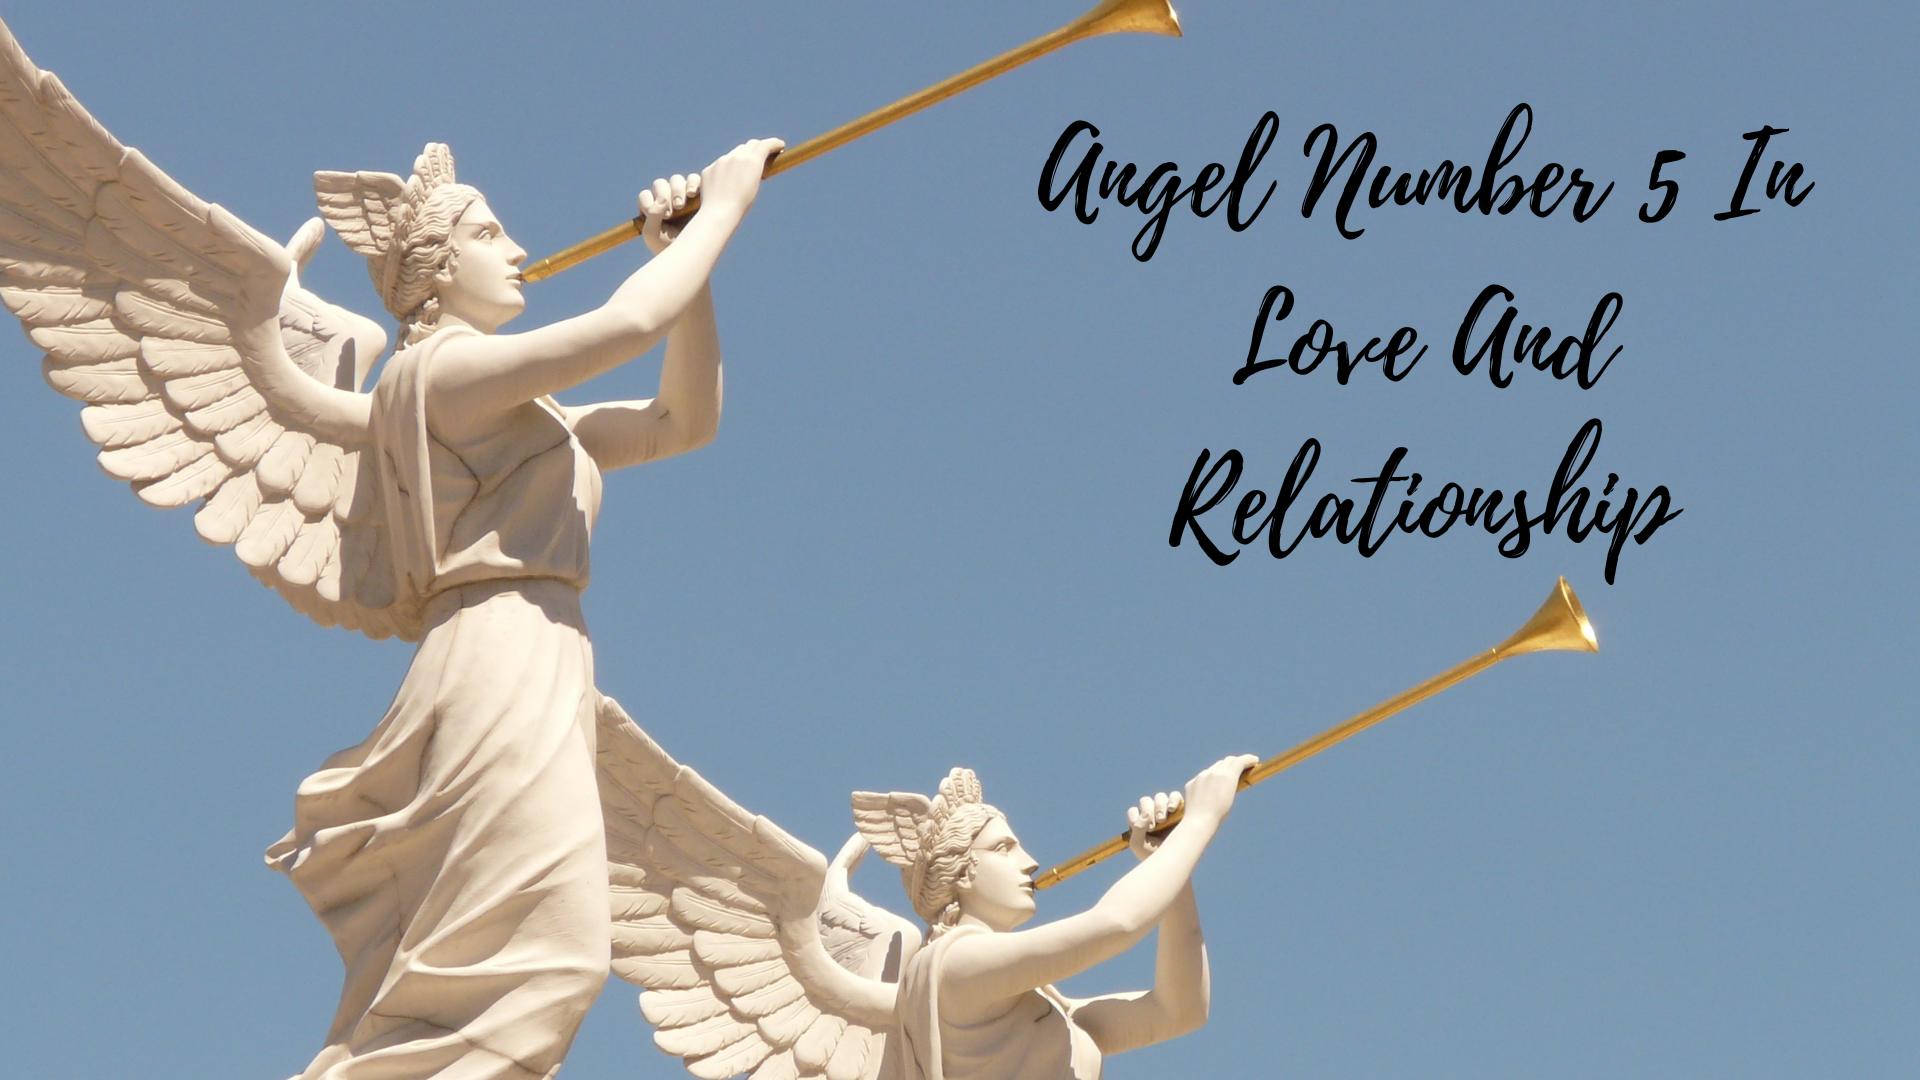 Angel statues with trumpets and words Angel Number 5 In Love And Relationship